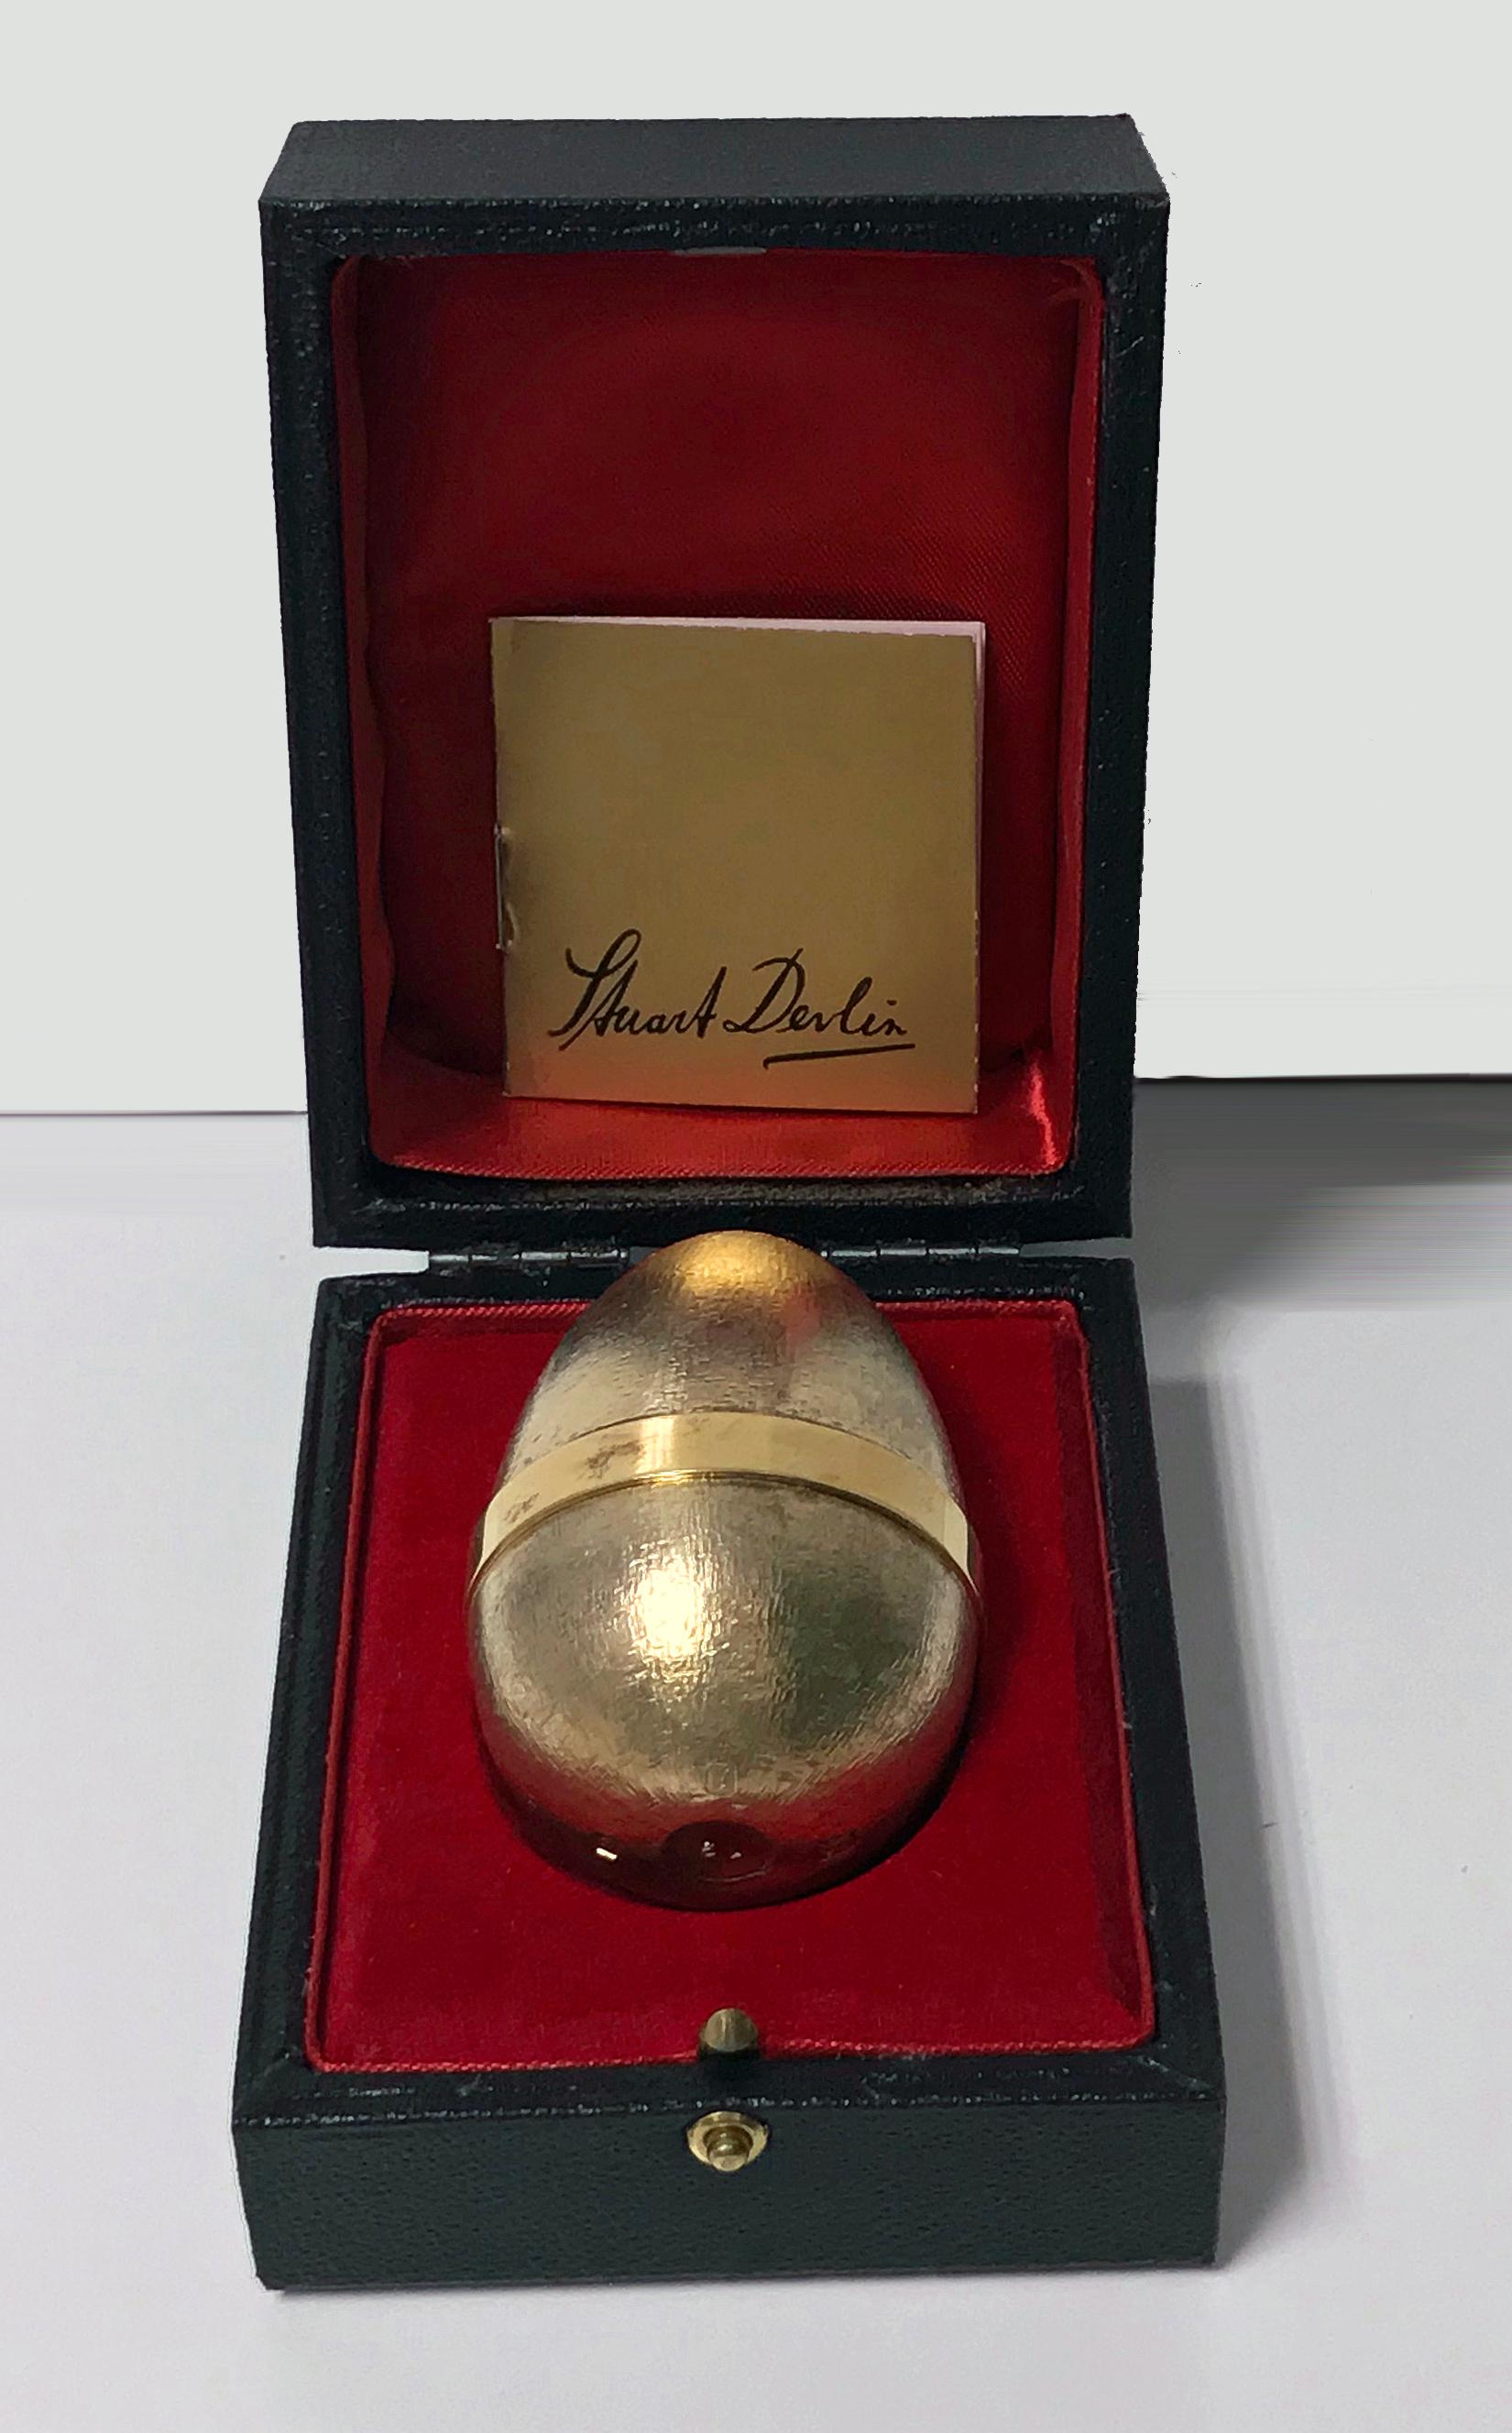 Stuart Devlin Silver Gilt Surprise Egg, London 1984, opening to reveal Swan or Duck family among reeds. Original box and papers. Height: 7.5cm high, No 19 of limited edition of 100. Item Weight: 135 grams.